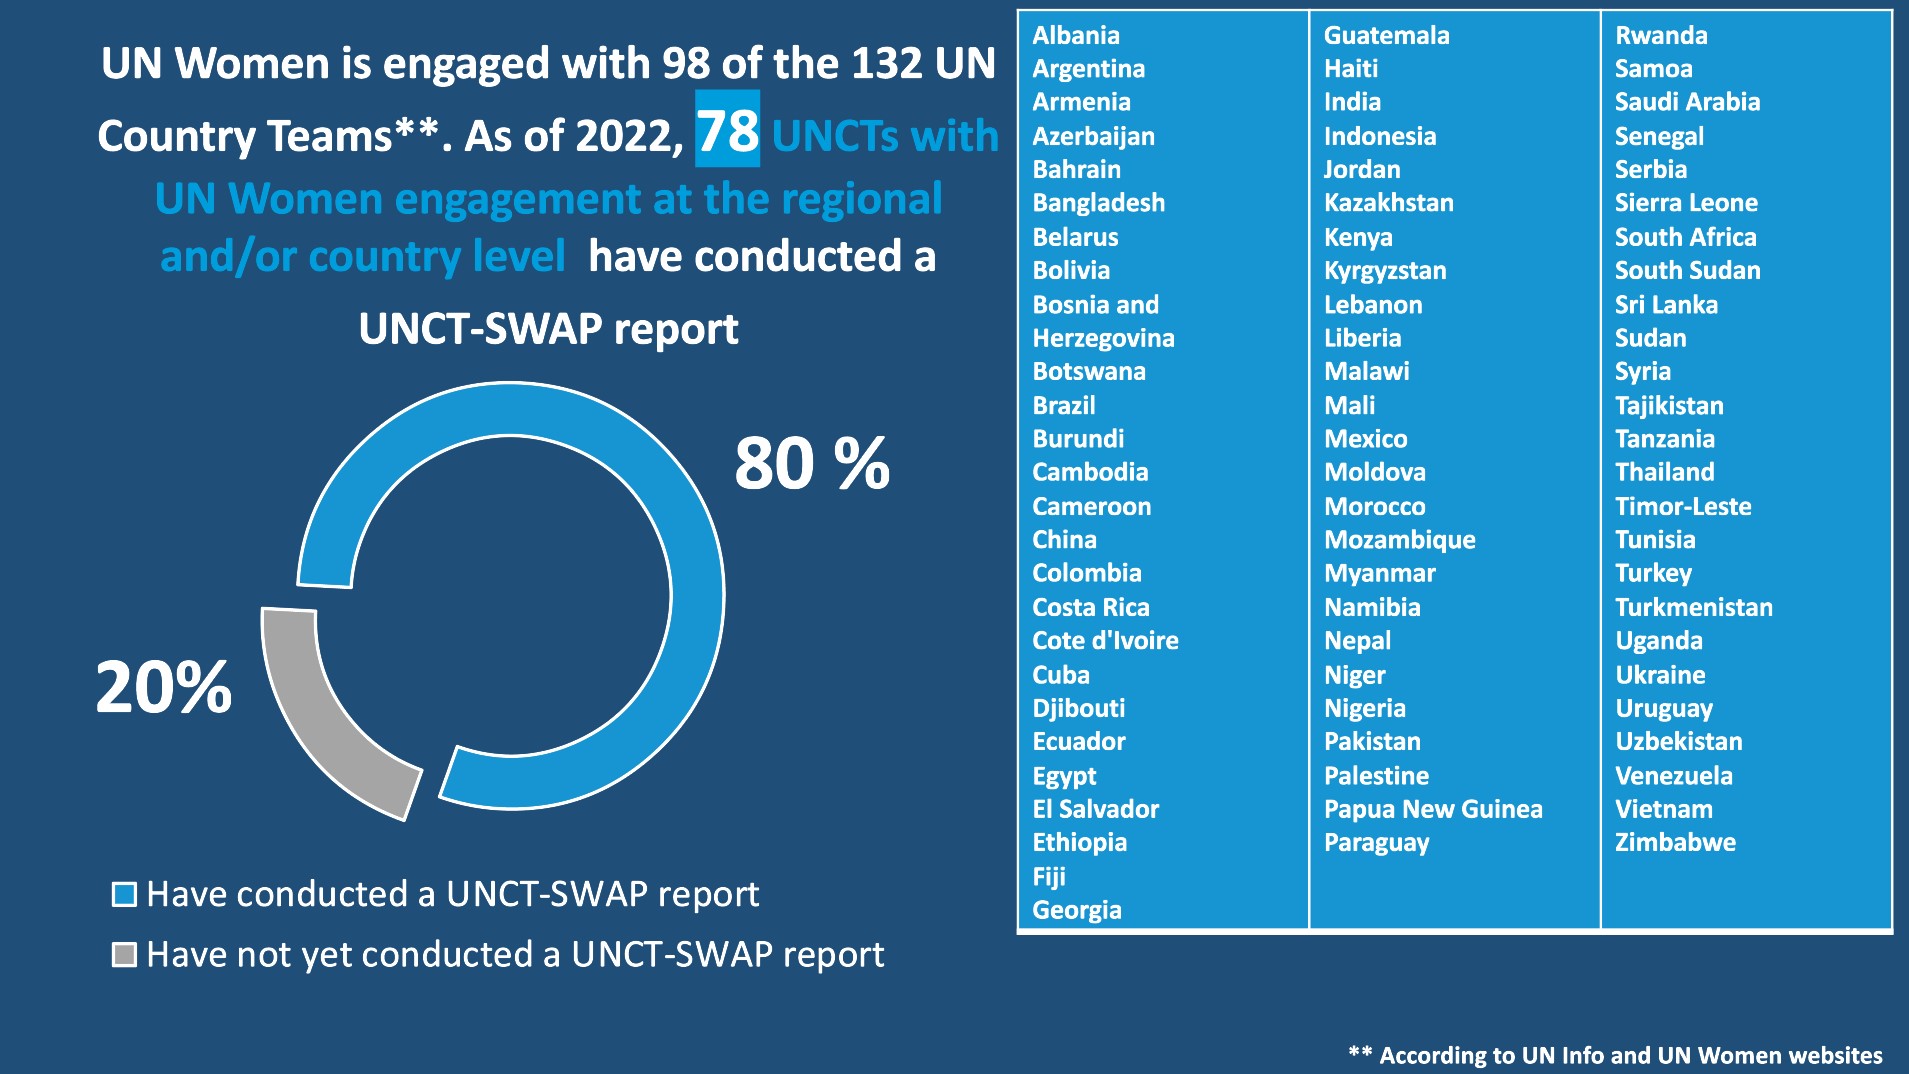  2022 UNCT SWAP Implementation Coverage of UNCTs with UN Women engagement